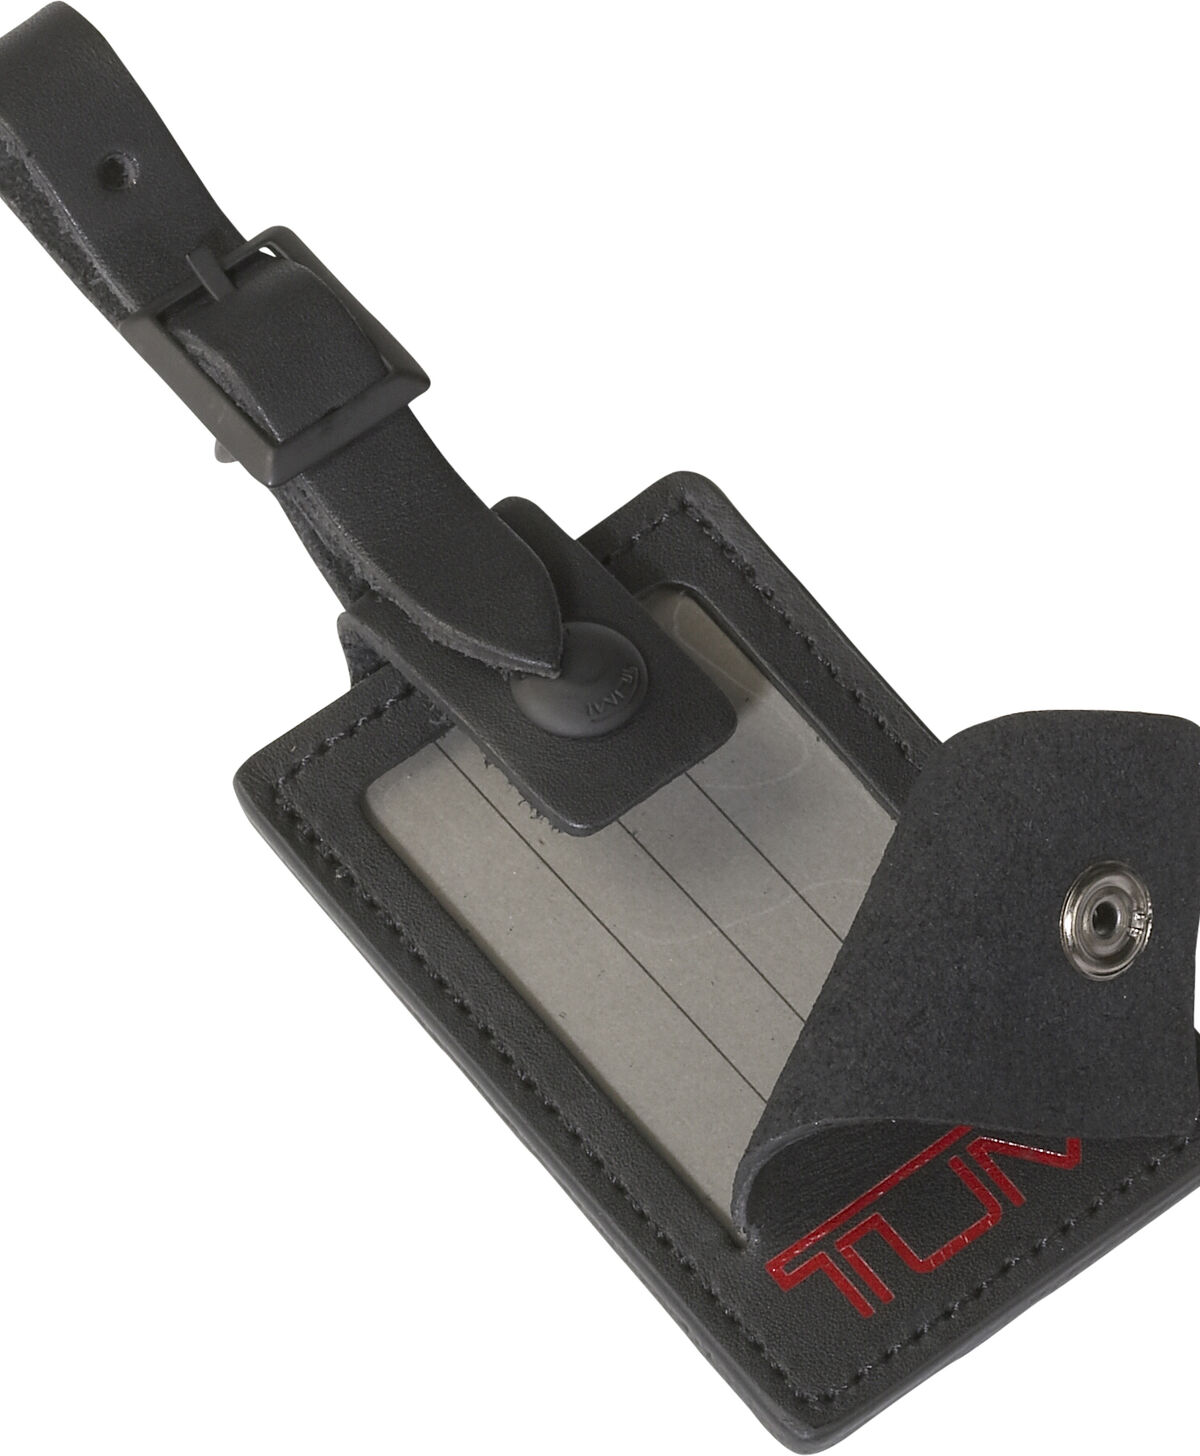 Tumi Replacement Parts ALPHA LUGGAGE TAG - MED  Black